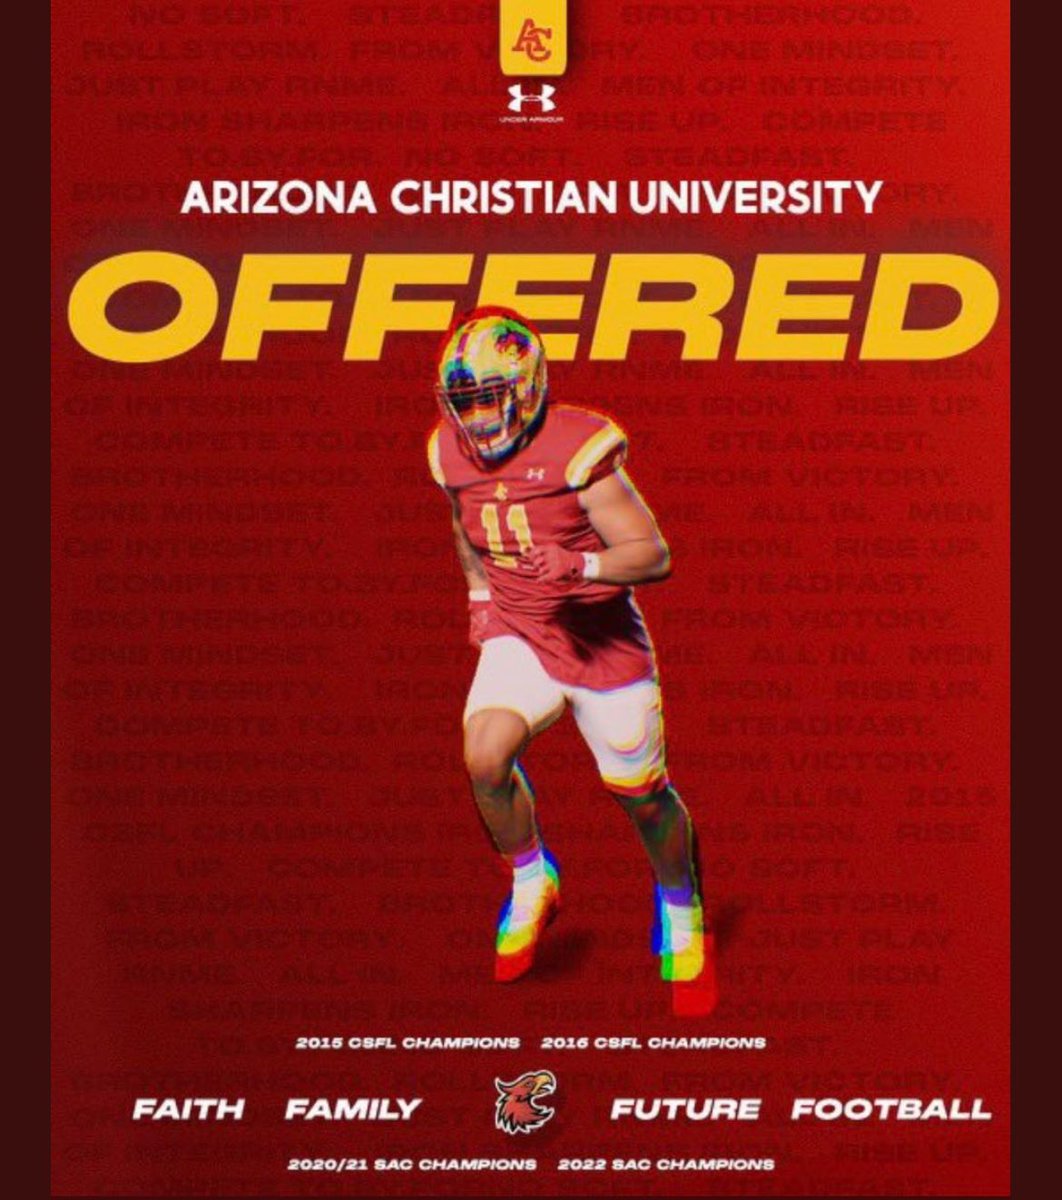 Just had a great conversation with @CoachM_Justin I’m excited to have received my 8th offer from Arizona Christian University thank you! @litten_andy @WClay99 @VaughanCoach @PVUSDATHLETICS @hzfbfamily @RonTBAOL @KelleyBeMoore @JeffBowenACU @CoachHarrisACU